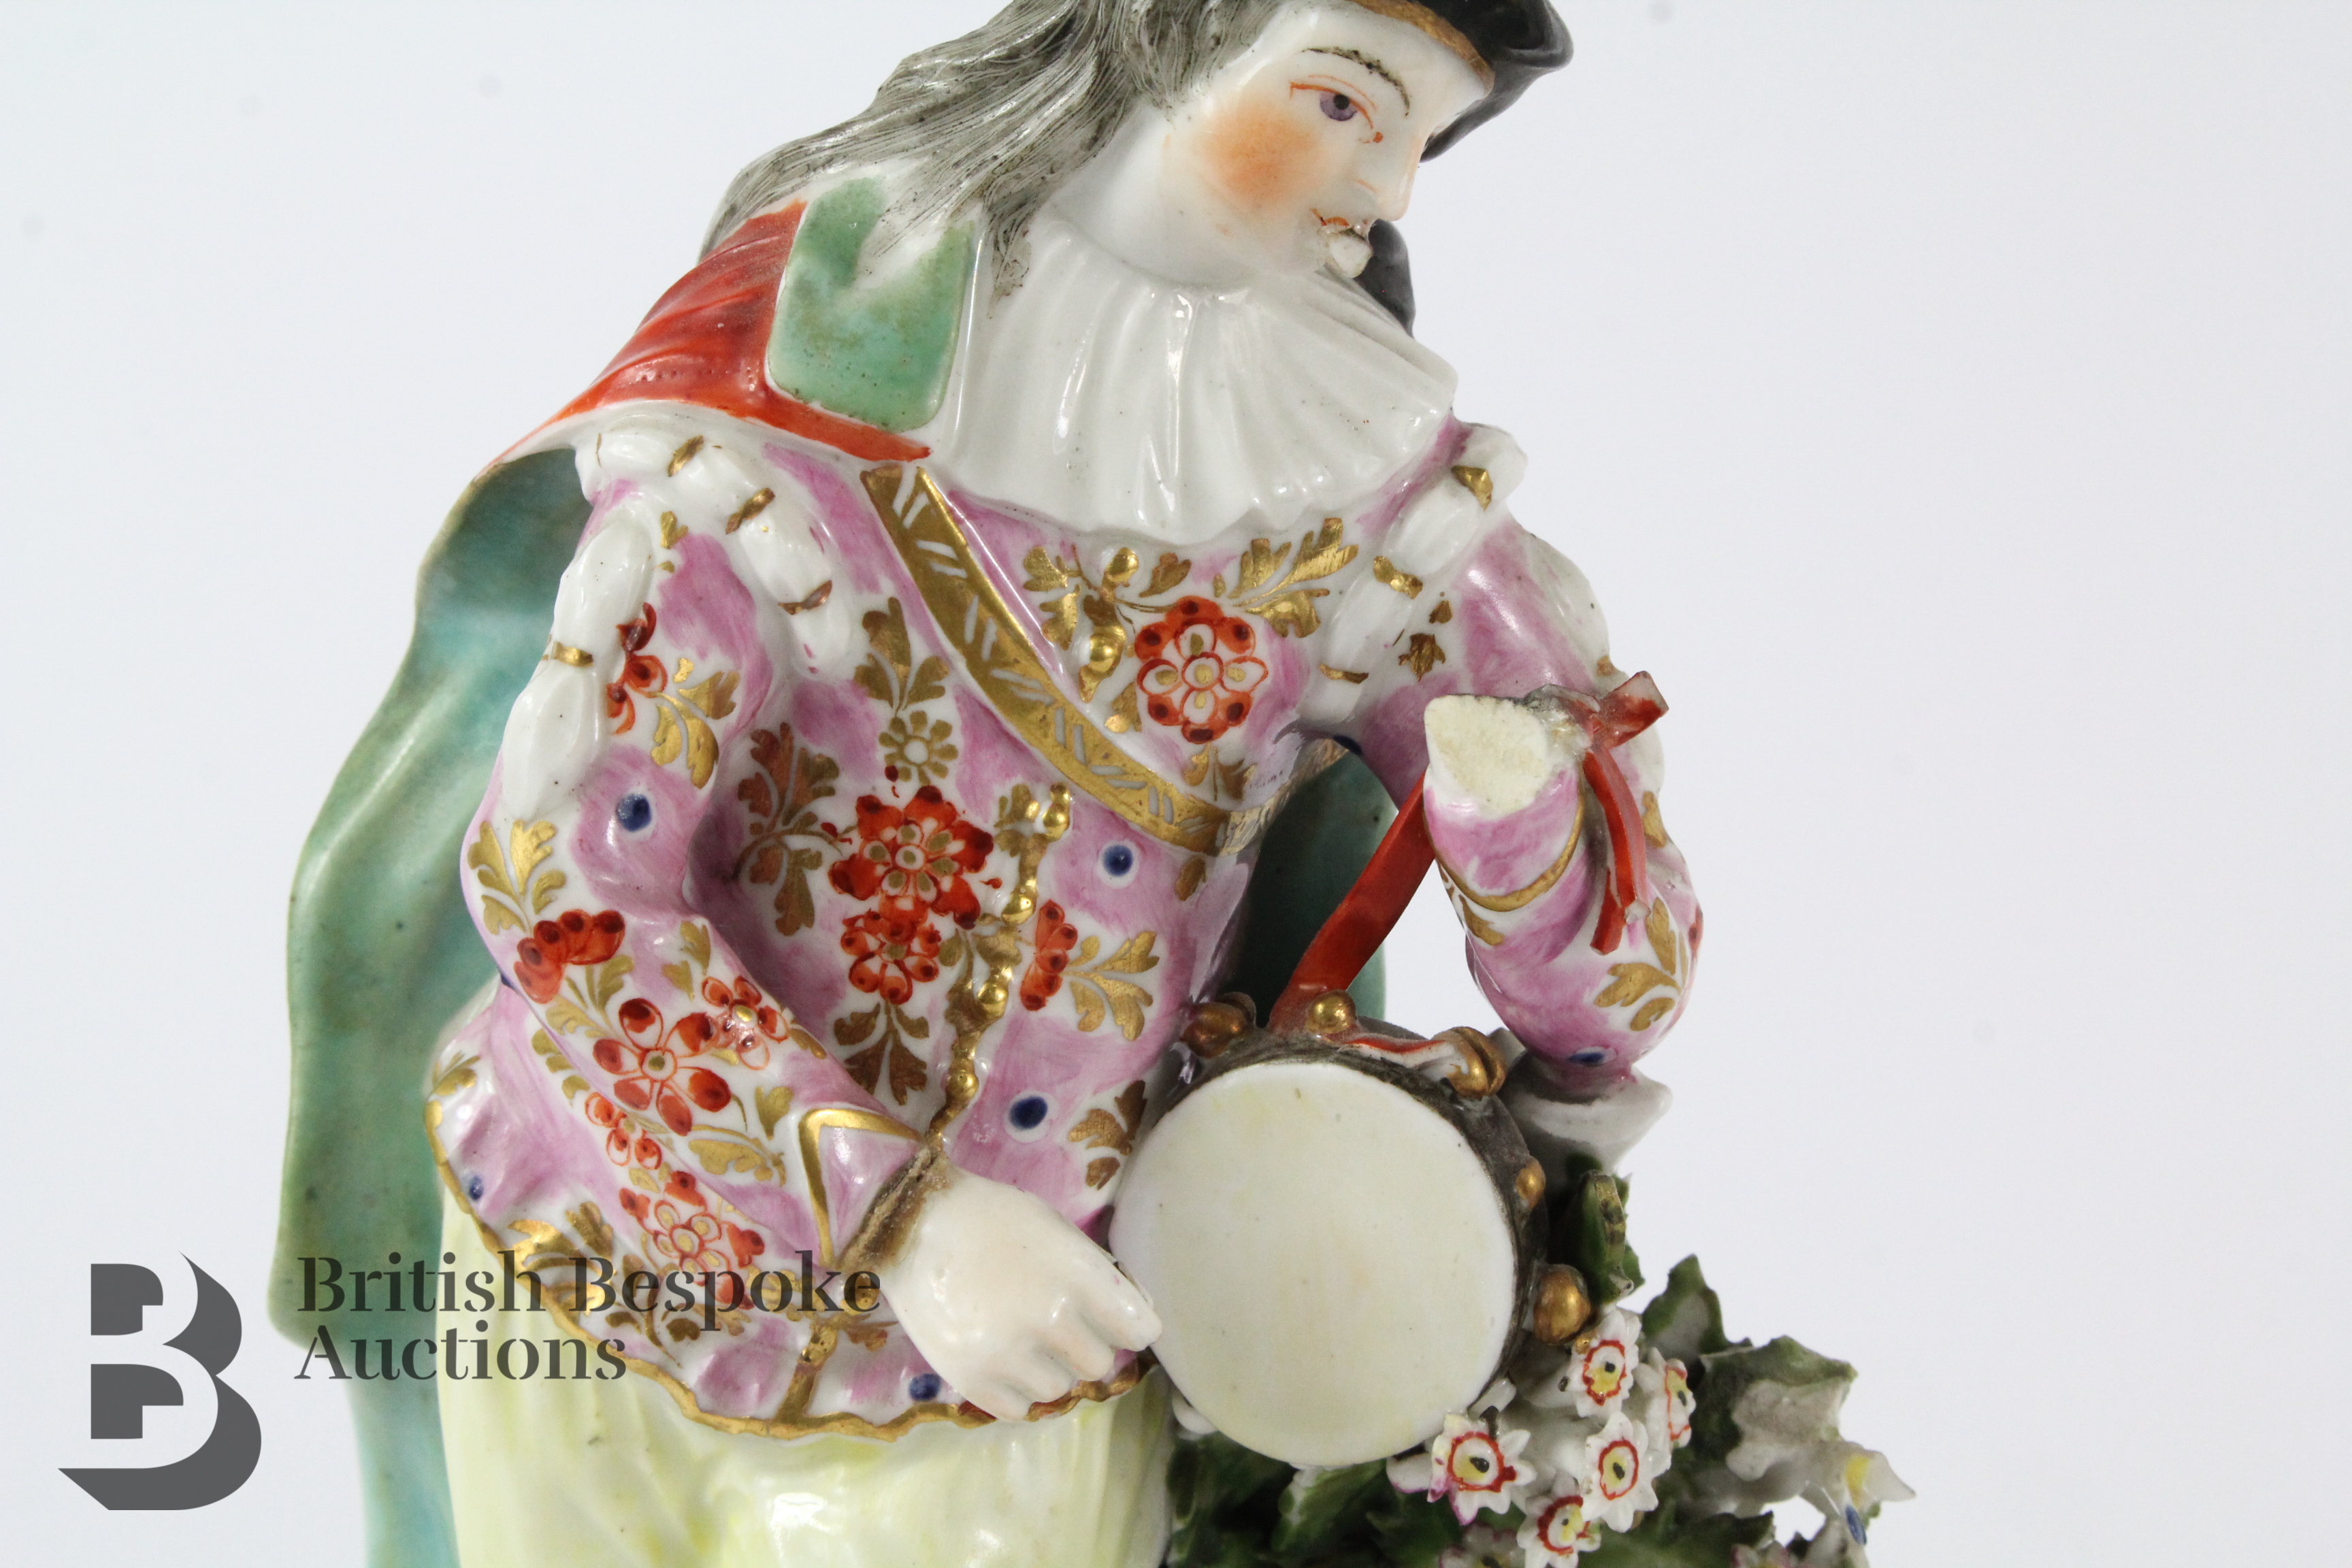 Pair of English Porcelain Bocage Figurines - Image 5 of 10